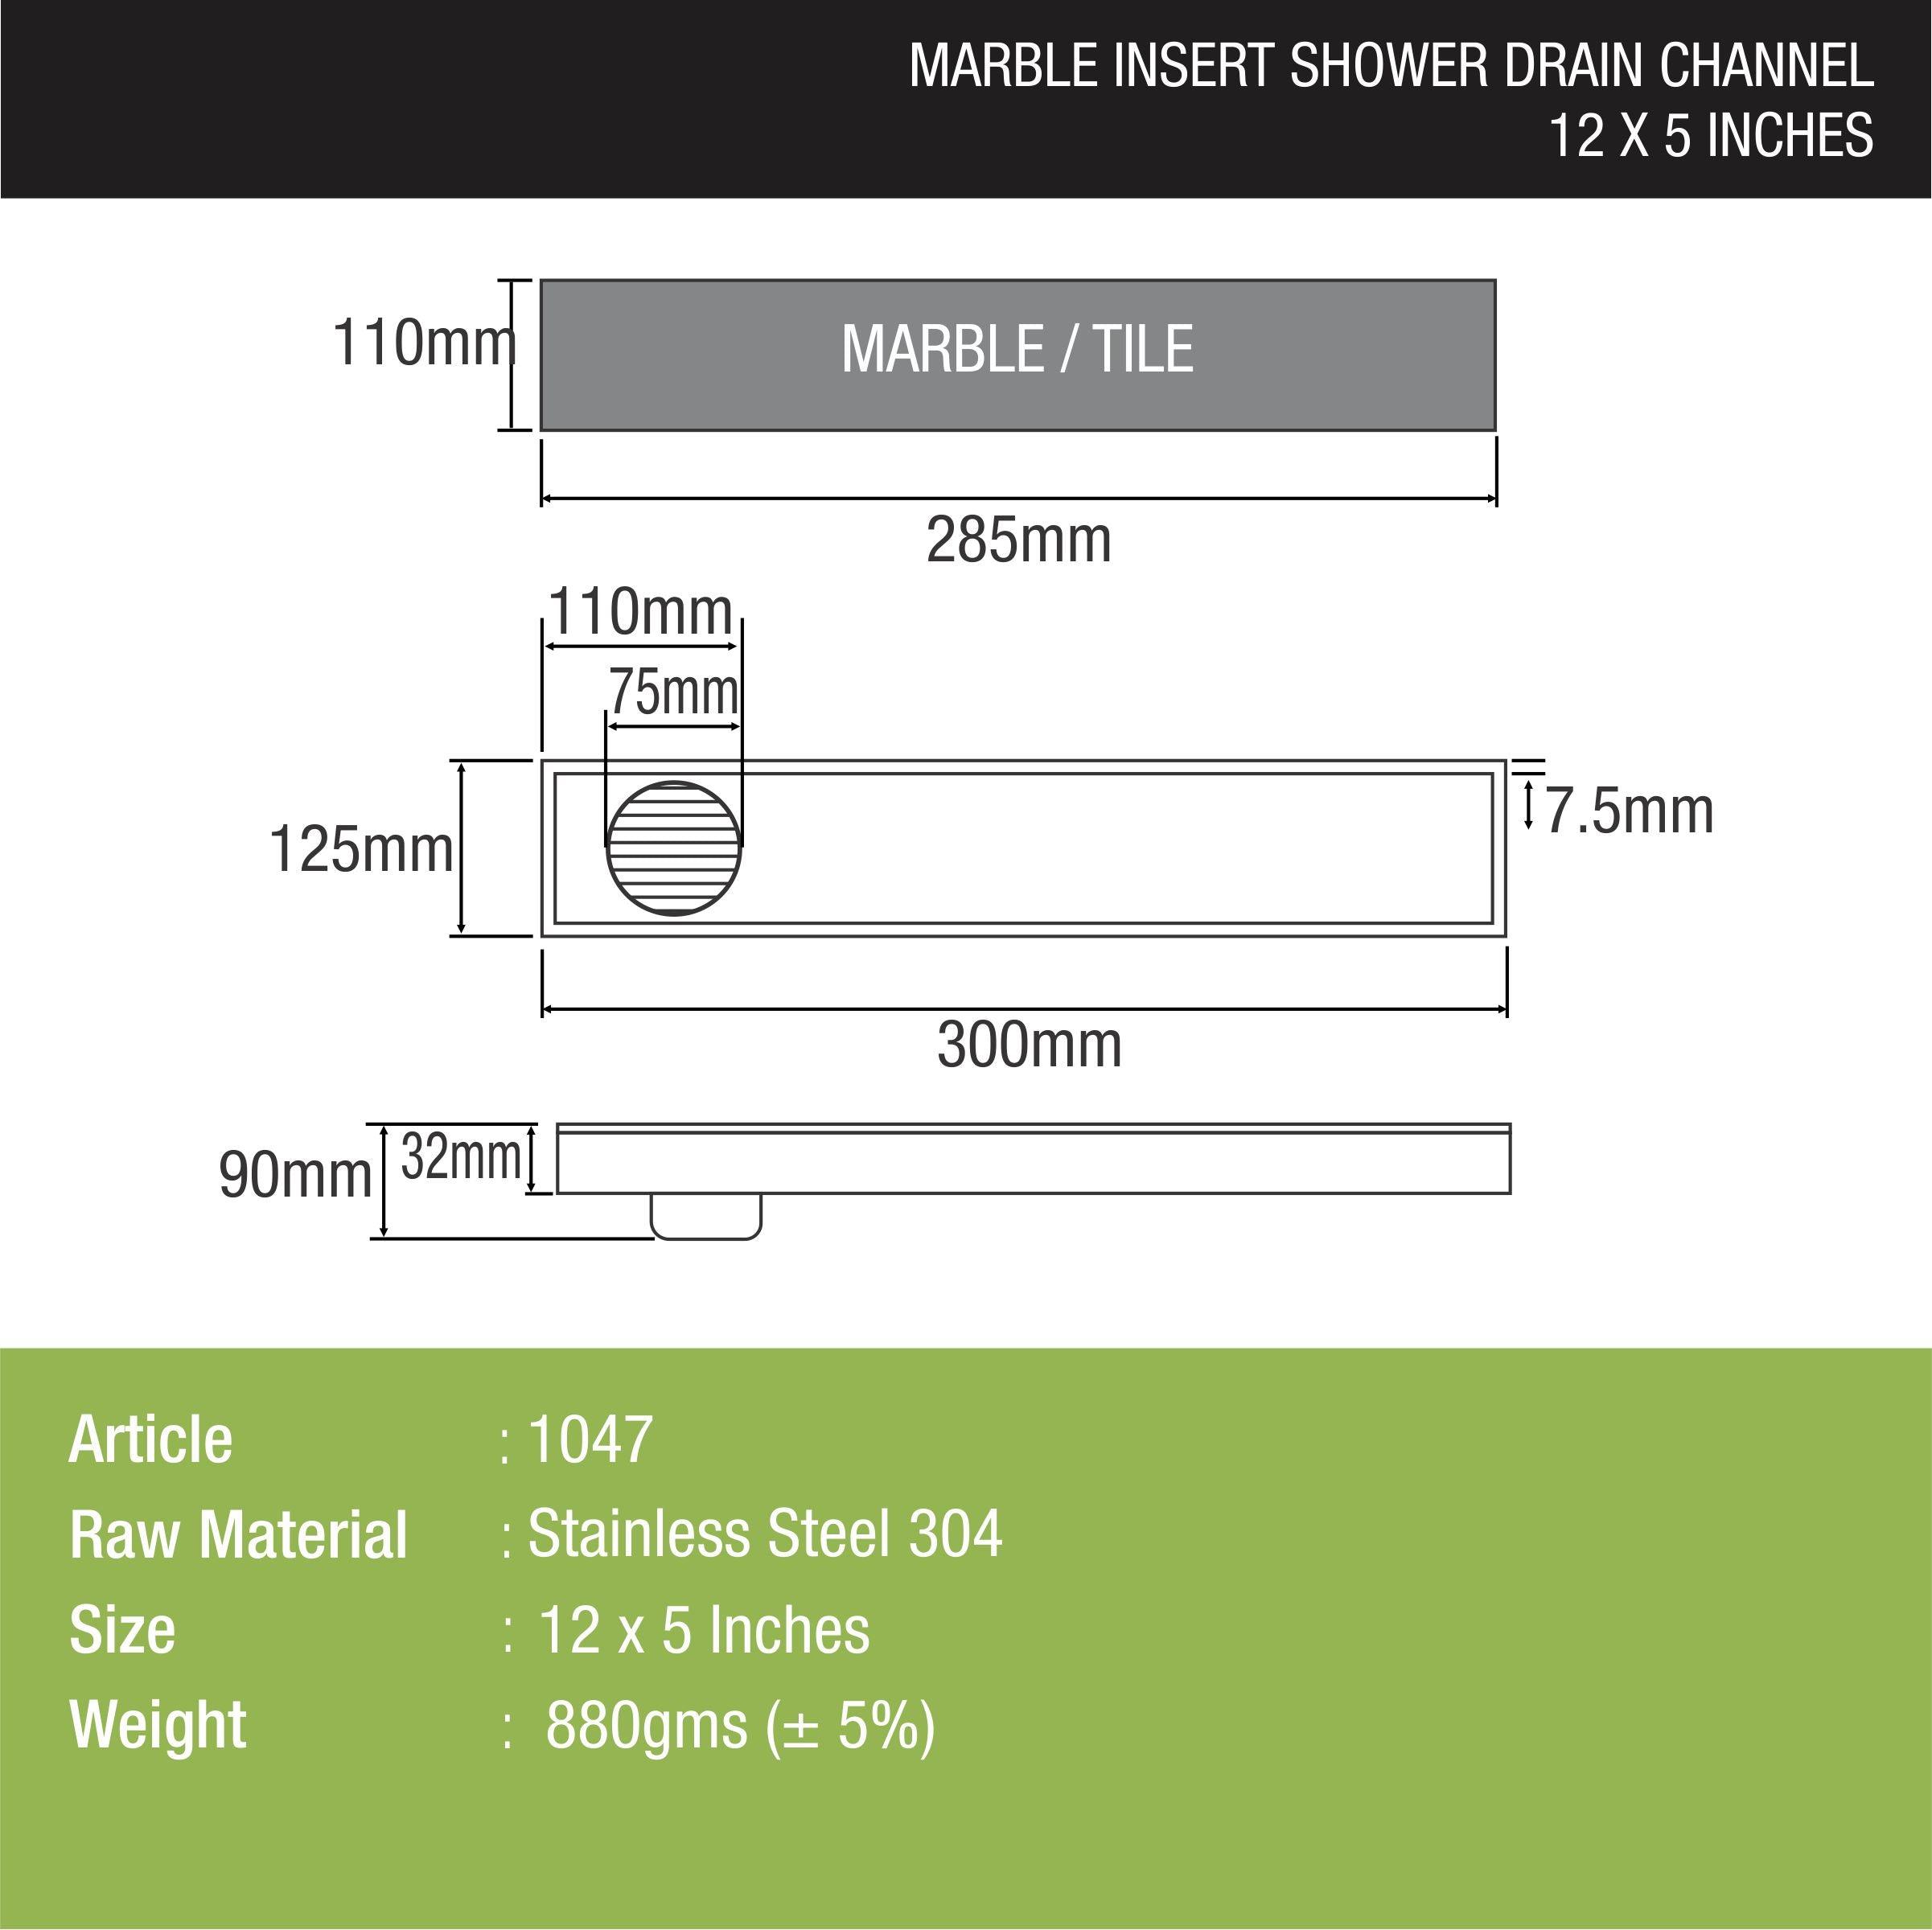 Marble Insert Shower Drain Channel (12 x 5 Inches) dimensions and sizes